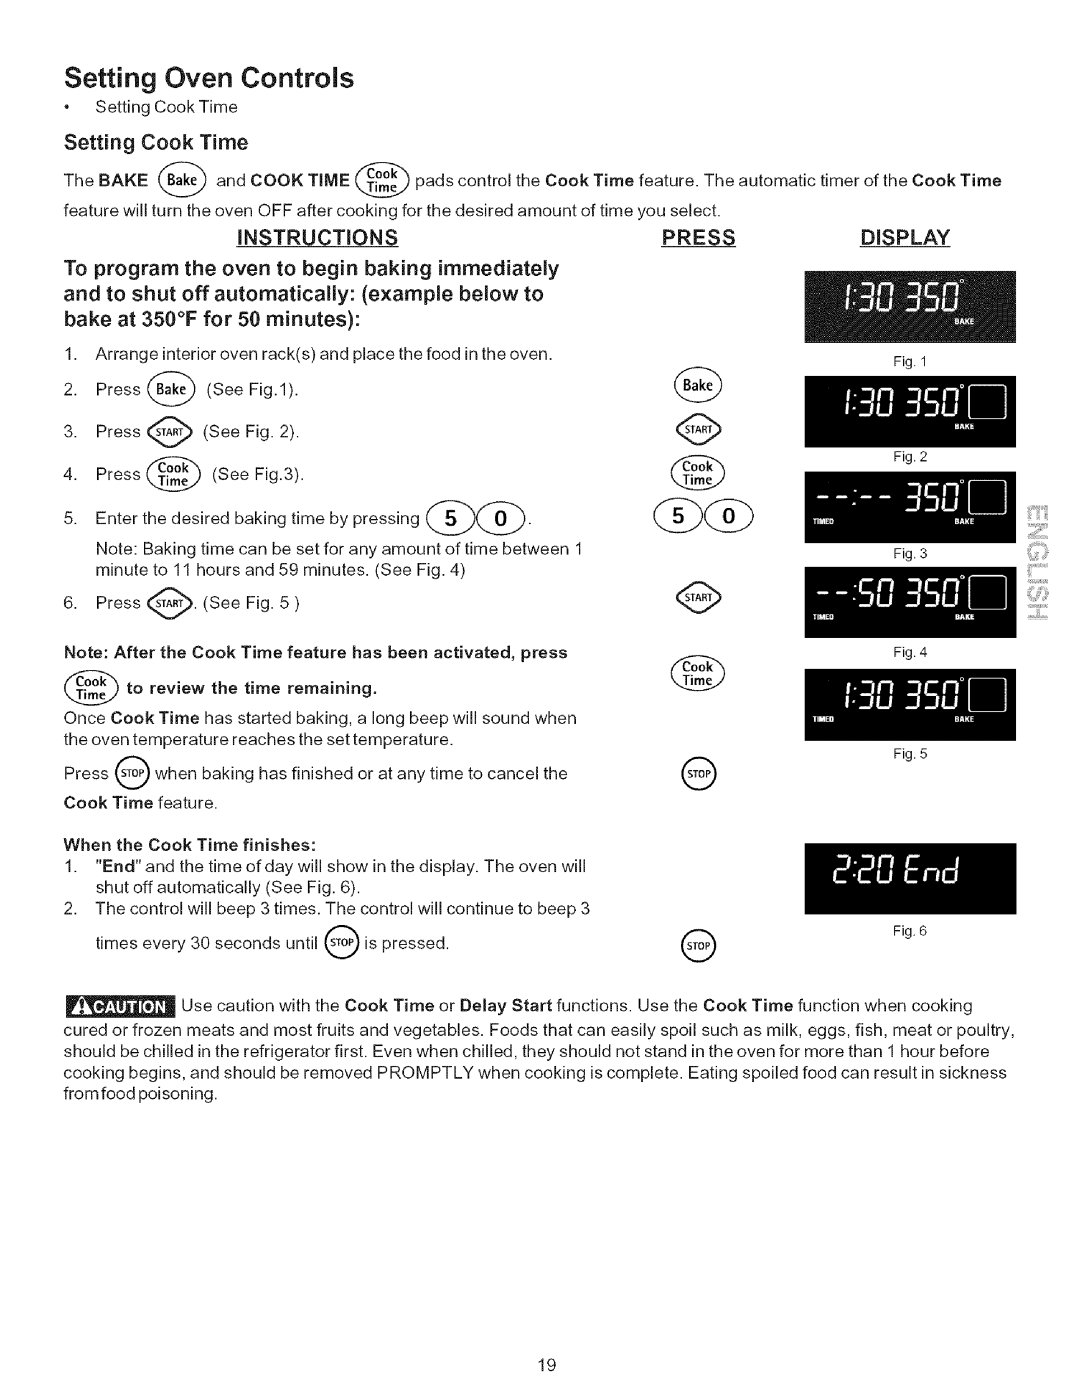 Kenmore 790.7943 manual Setting Oven Controls, Setting Cook Time, Instructionspress, Display 